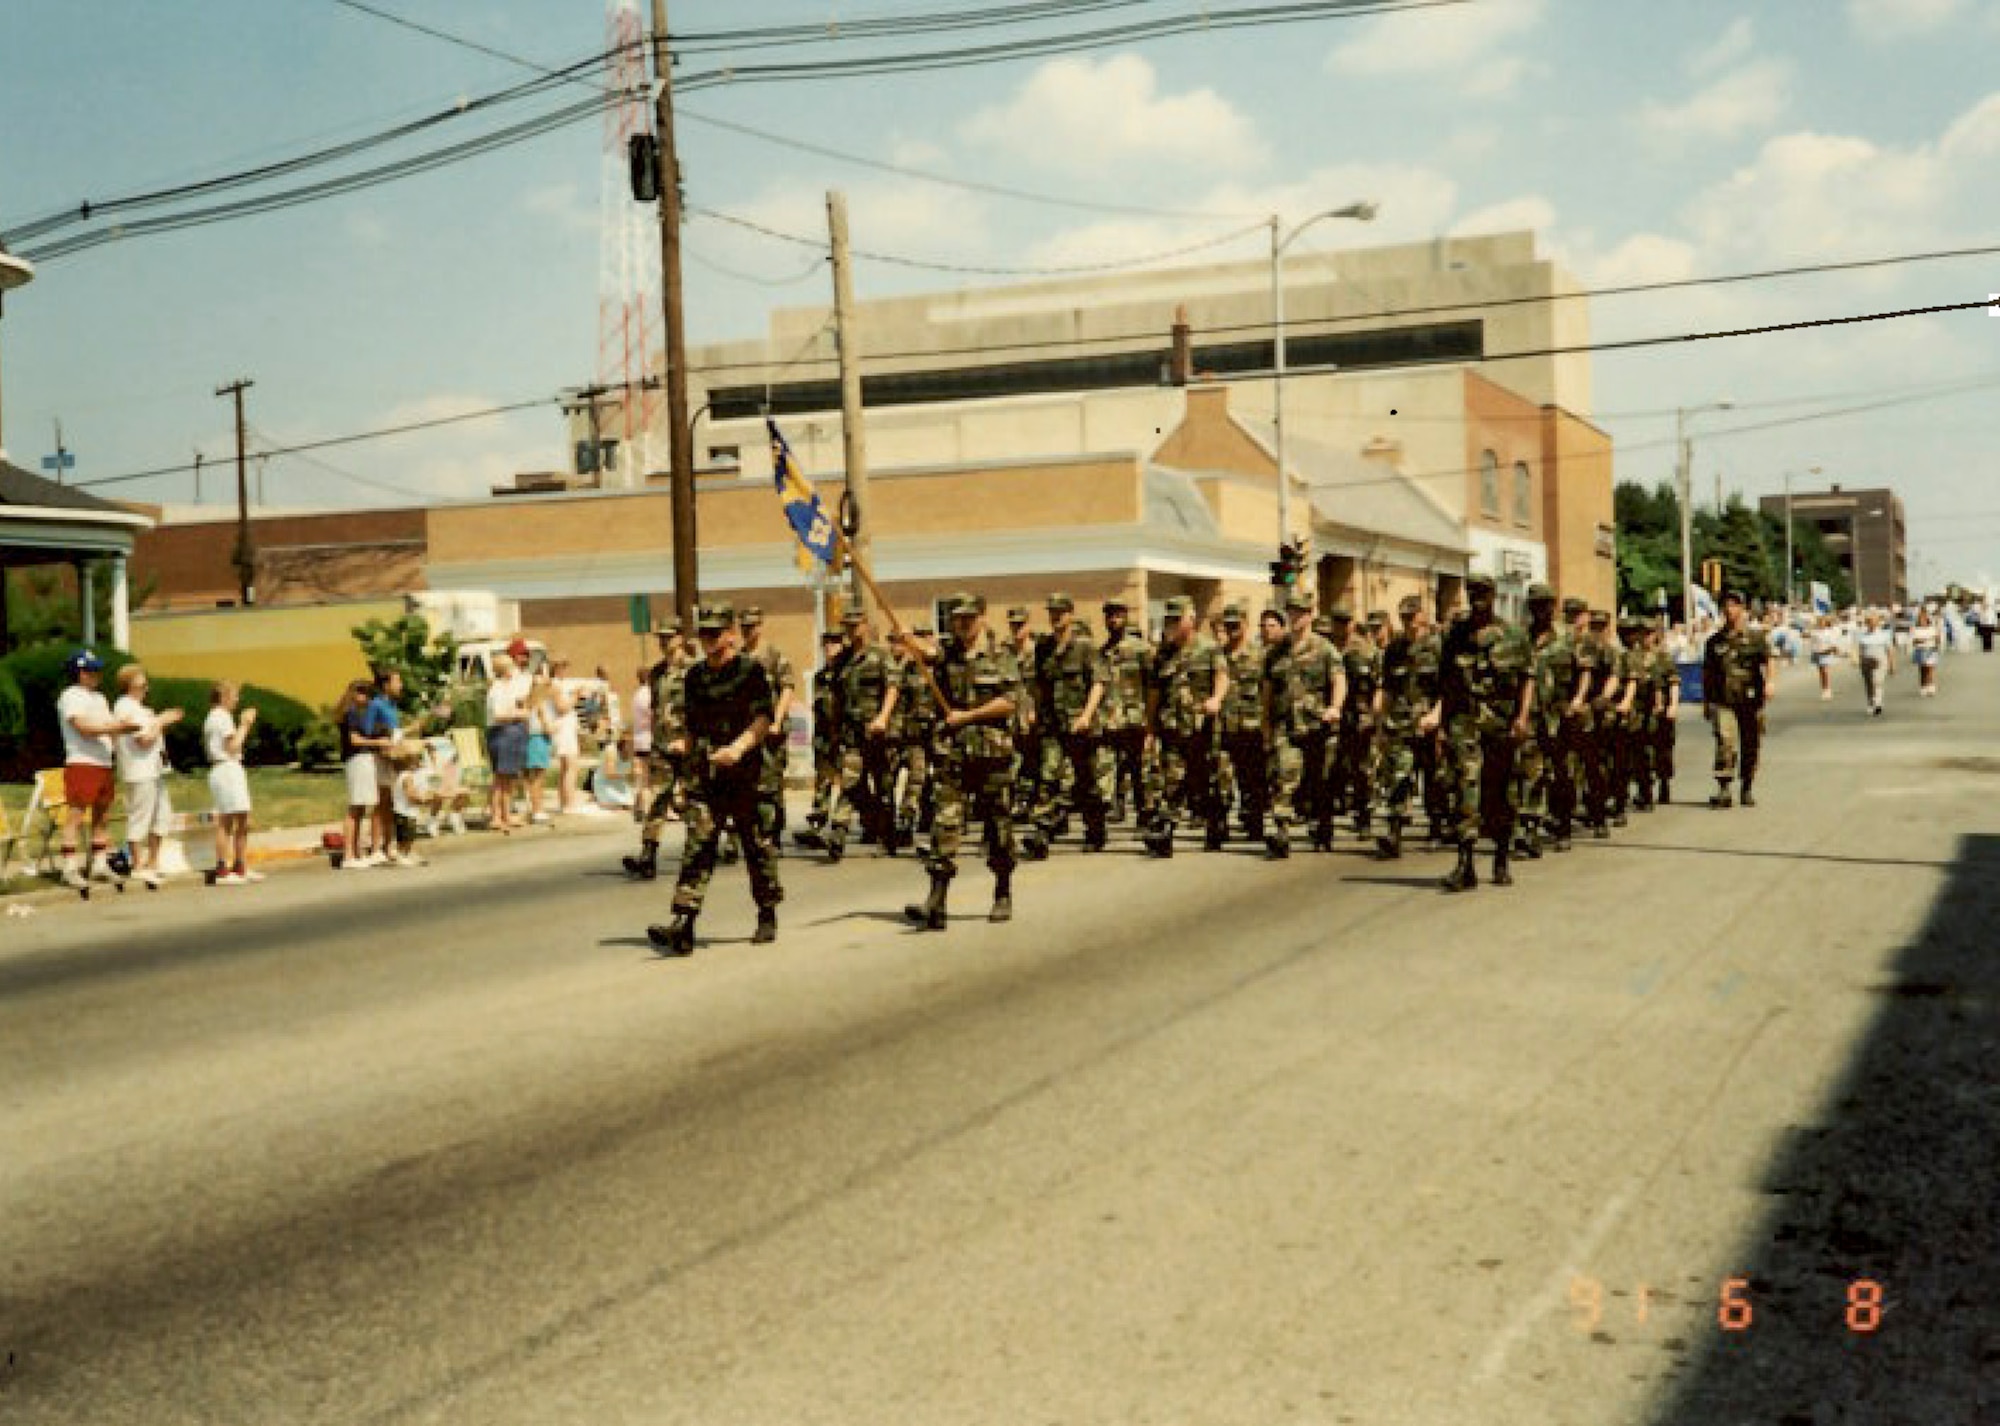 Air Force Reserve members march in a welcome home parade in downtown Bellville, Ill. after returning from deployment in support of Operation Desert Storm in 1991. (U.S. Air Force photo provided)